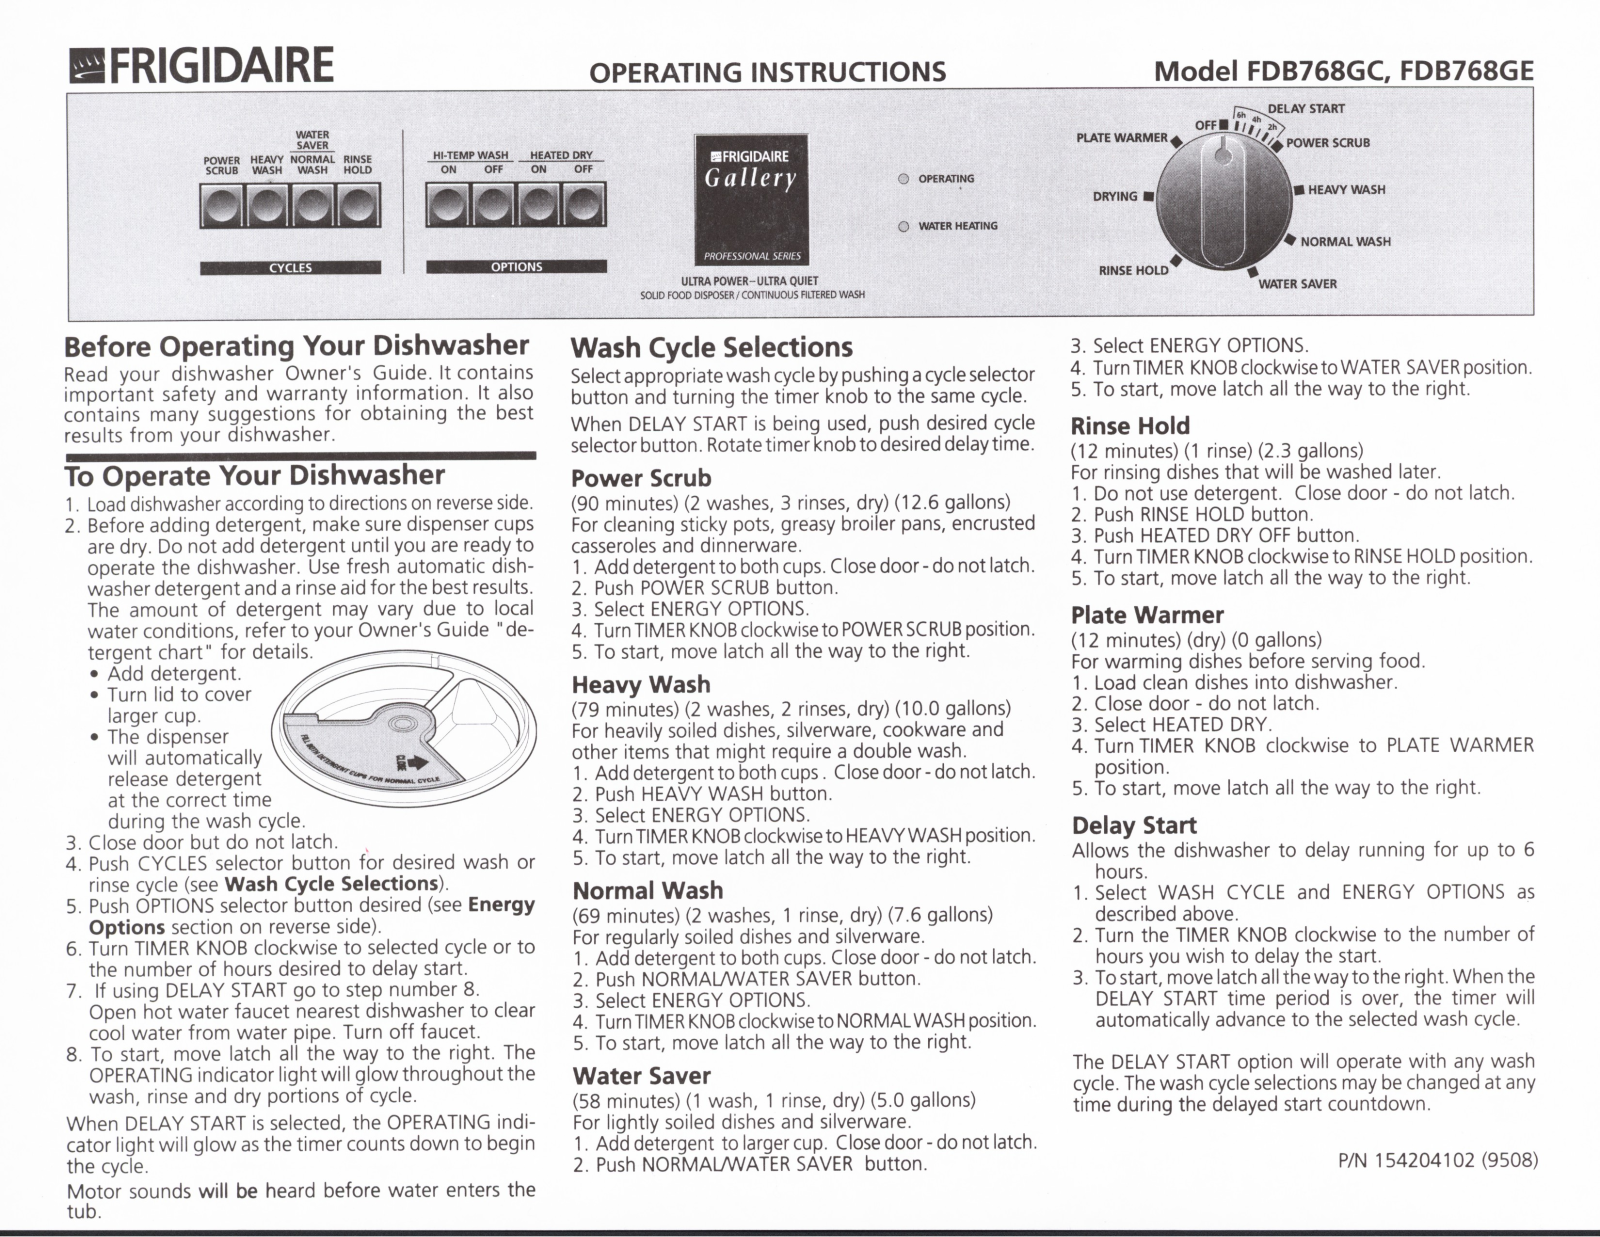 Frigidaire FDB768GD Owner's Guide